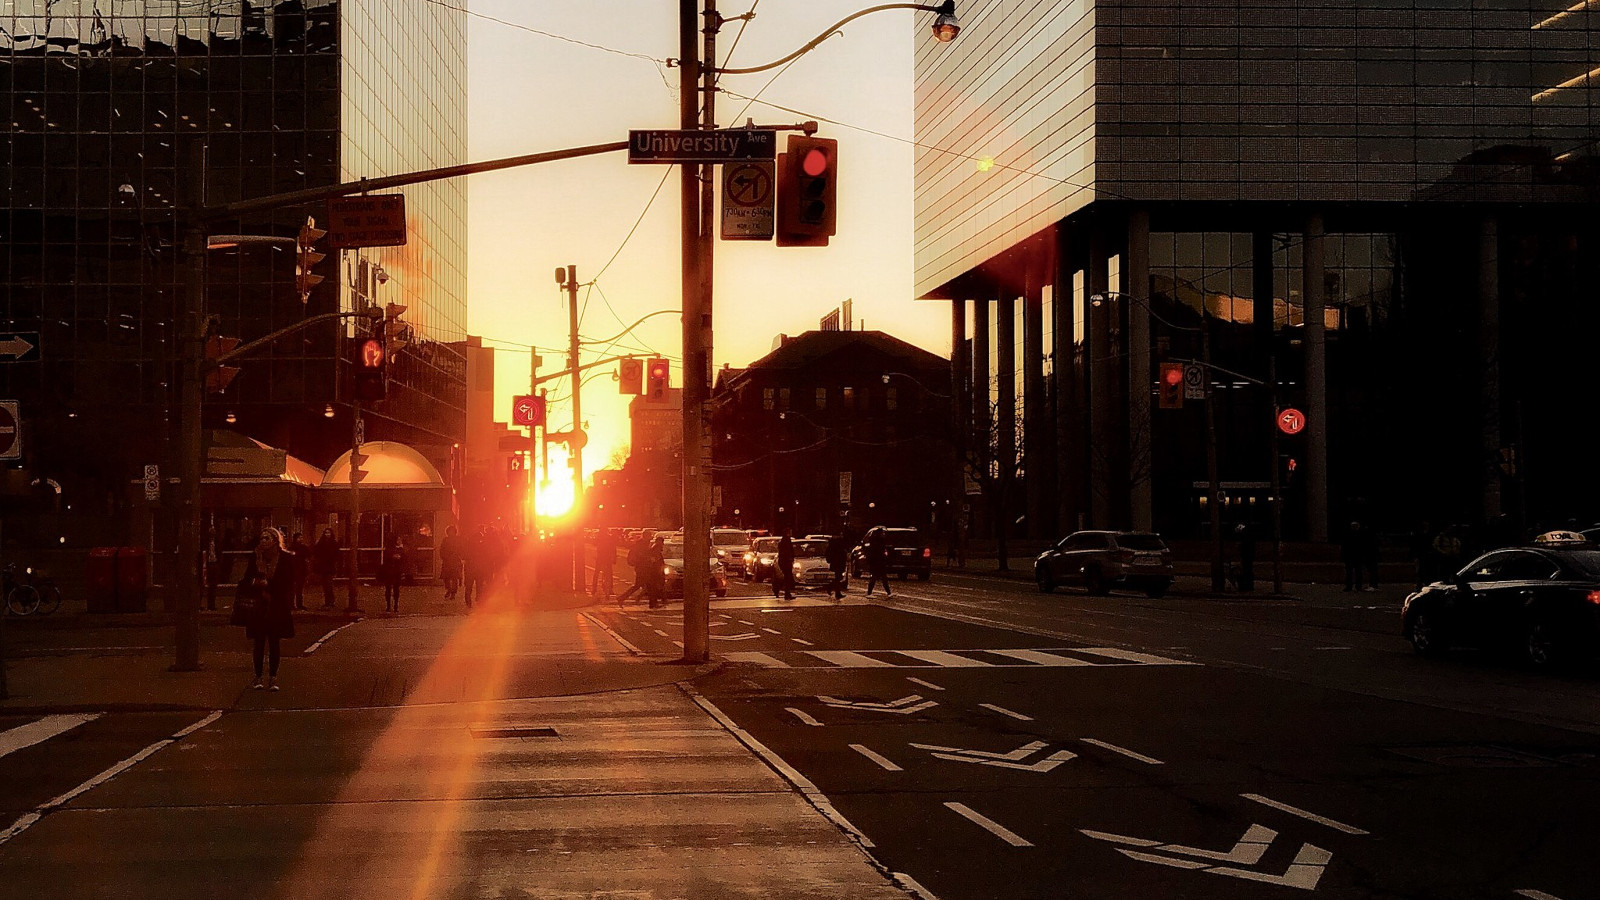 cloudy skies obscuring torontohenge? here's when you can see it